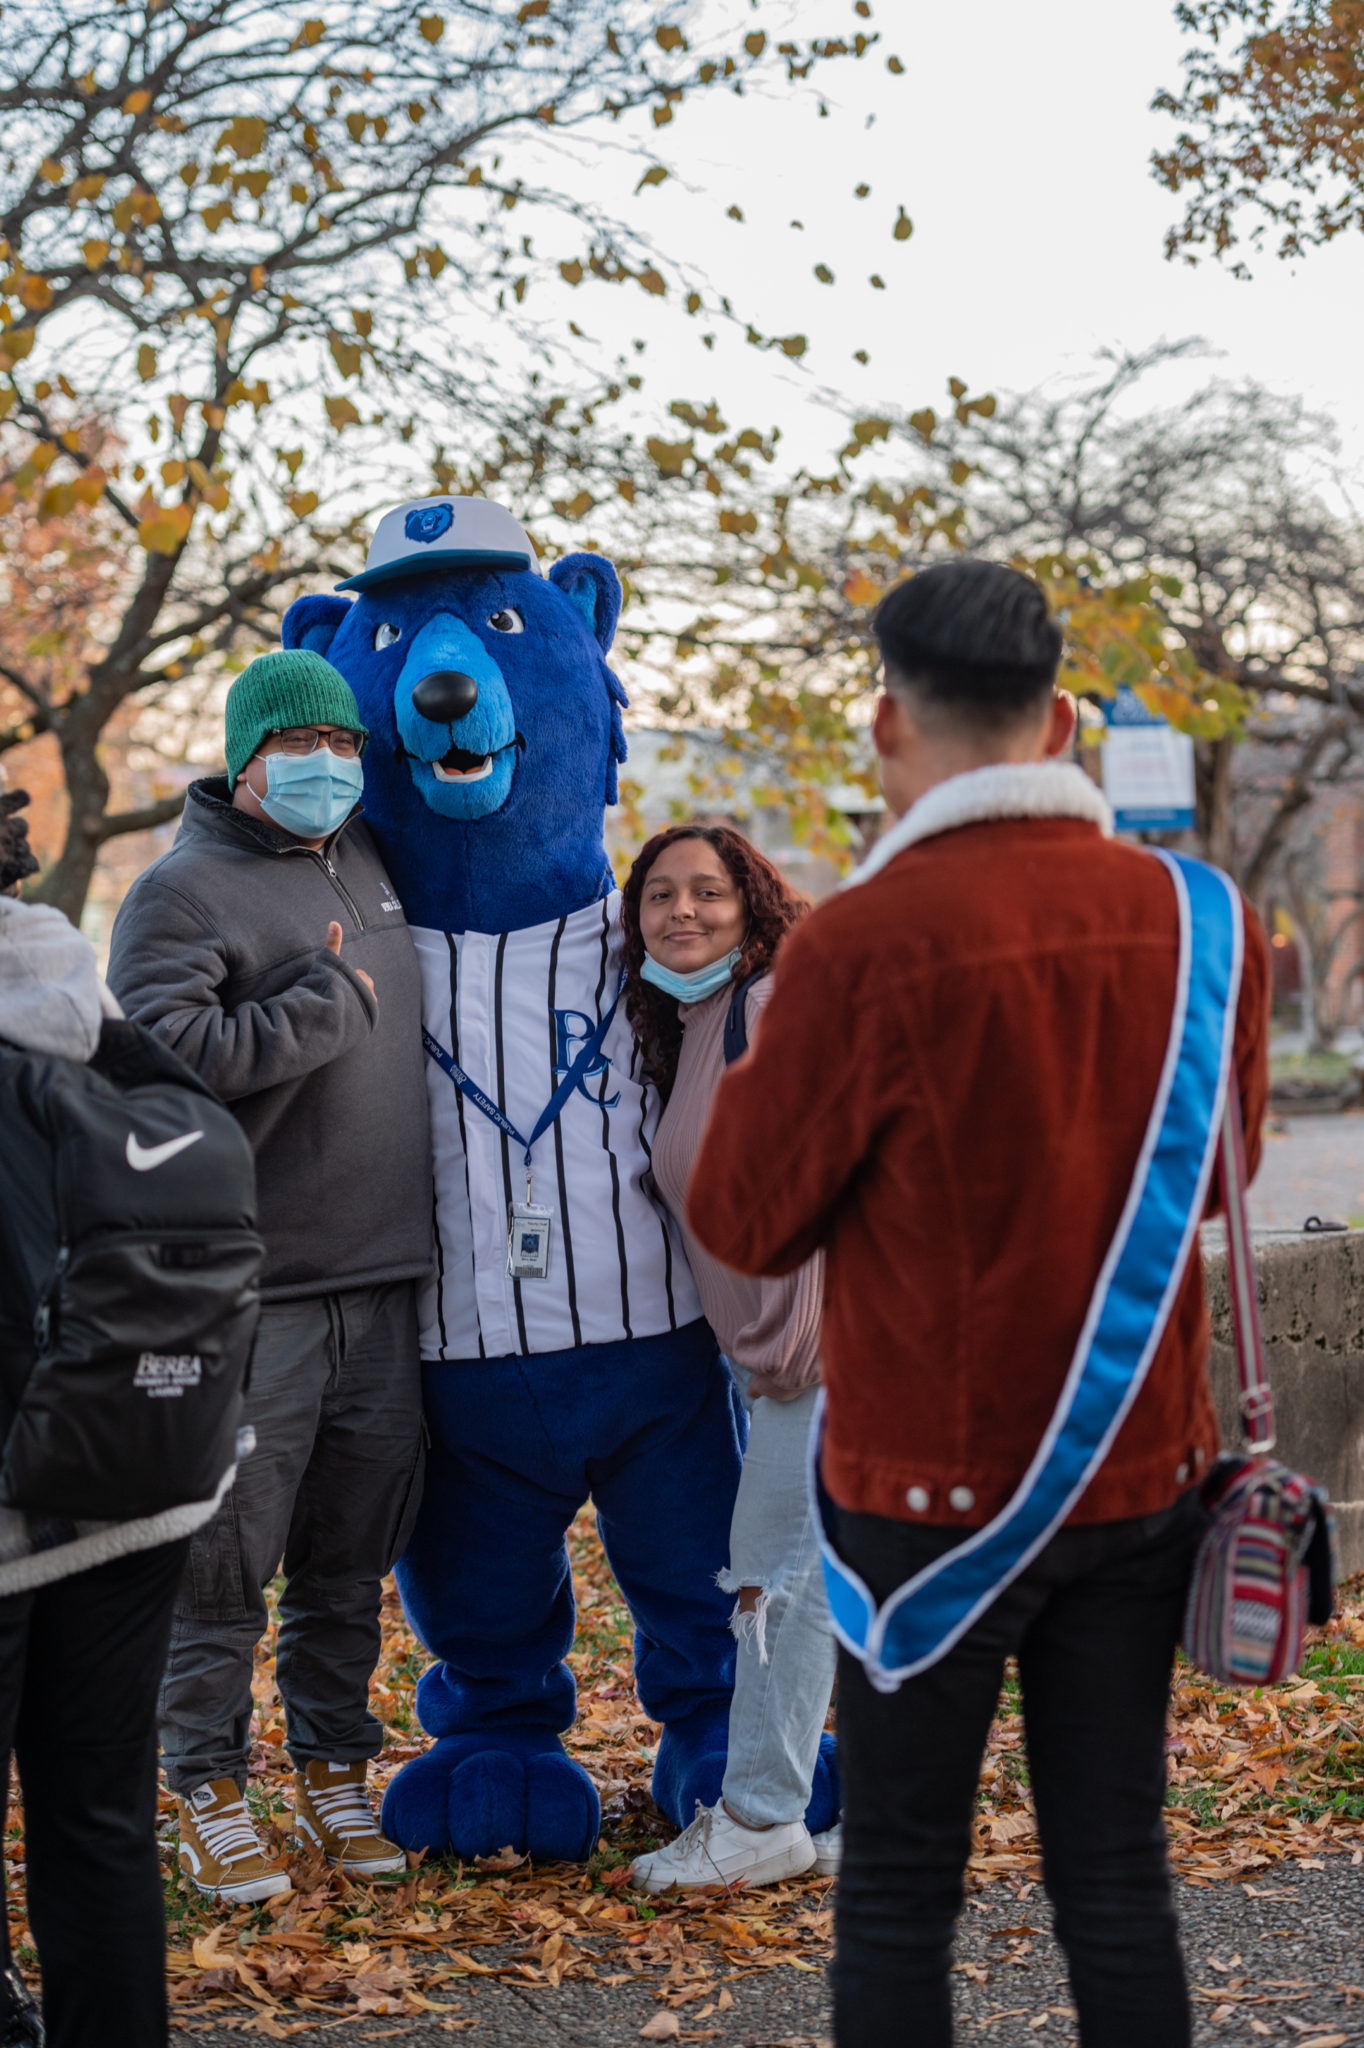 Blue, the mascot, poses with students